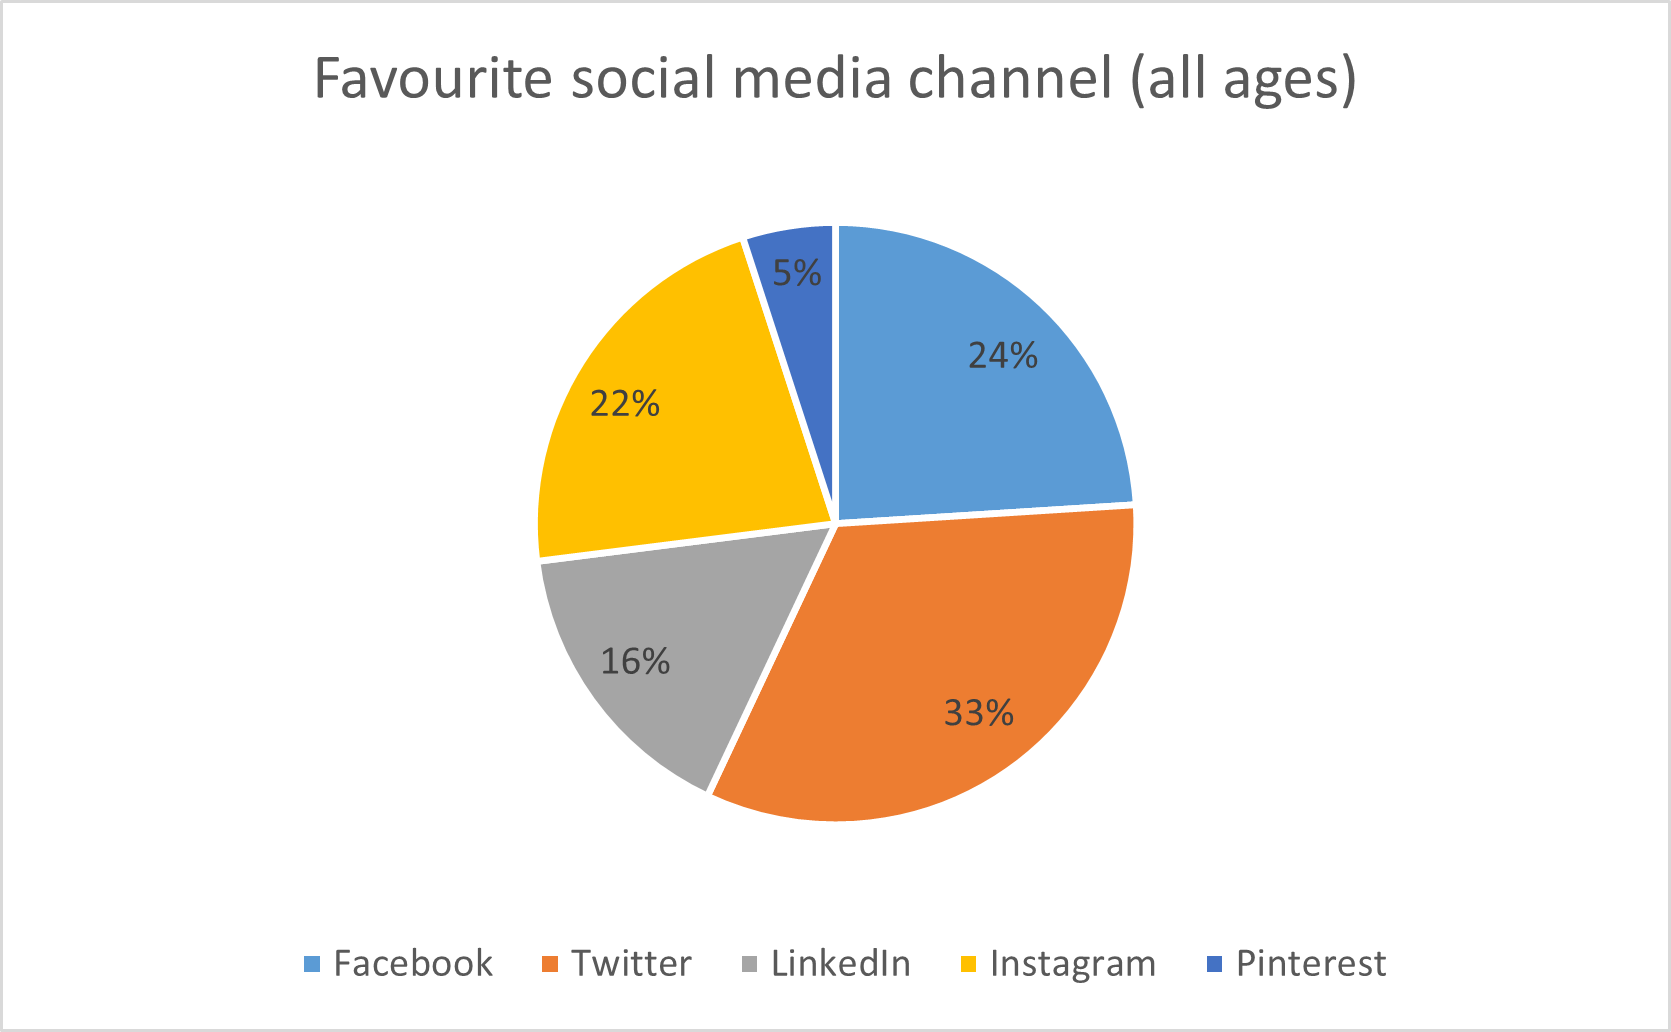 Pie chart showing favourite social media channel